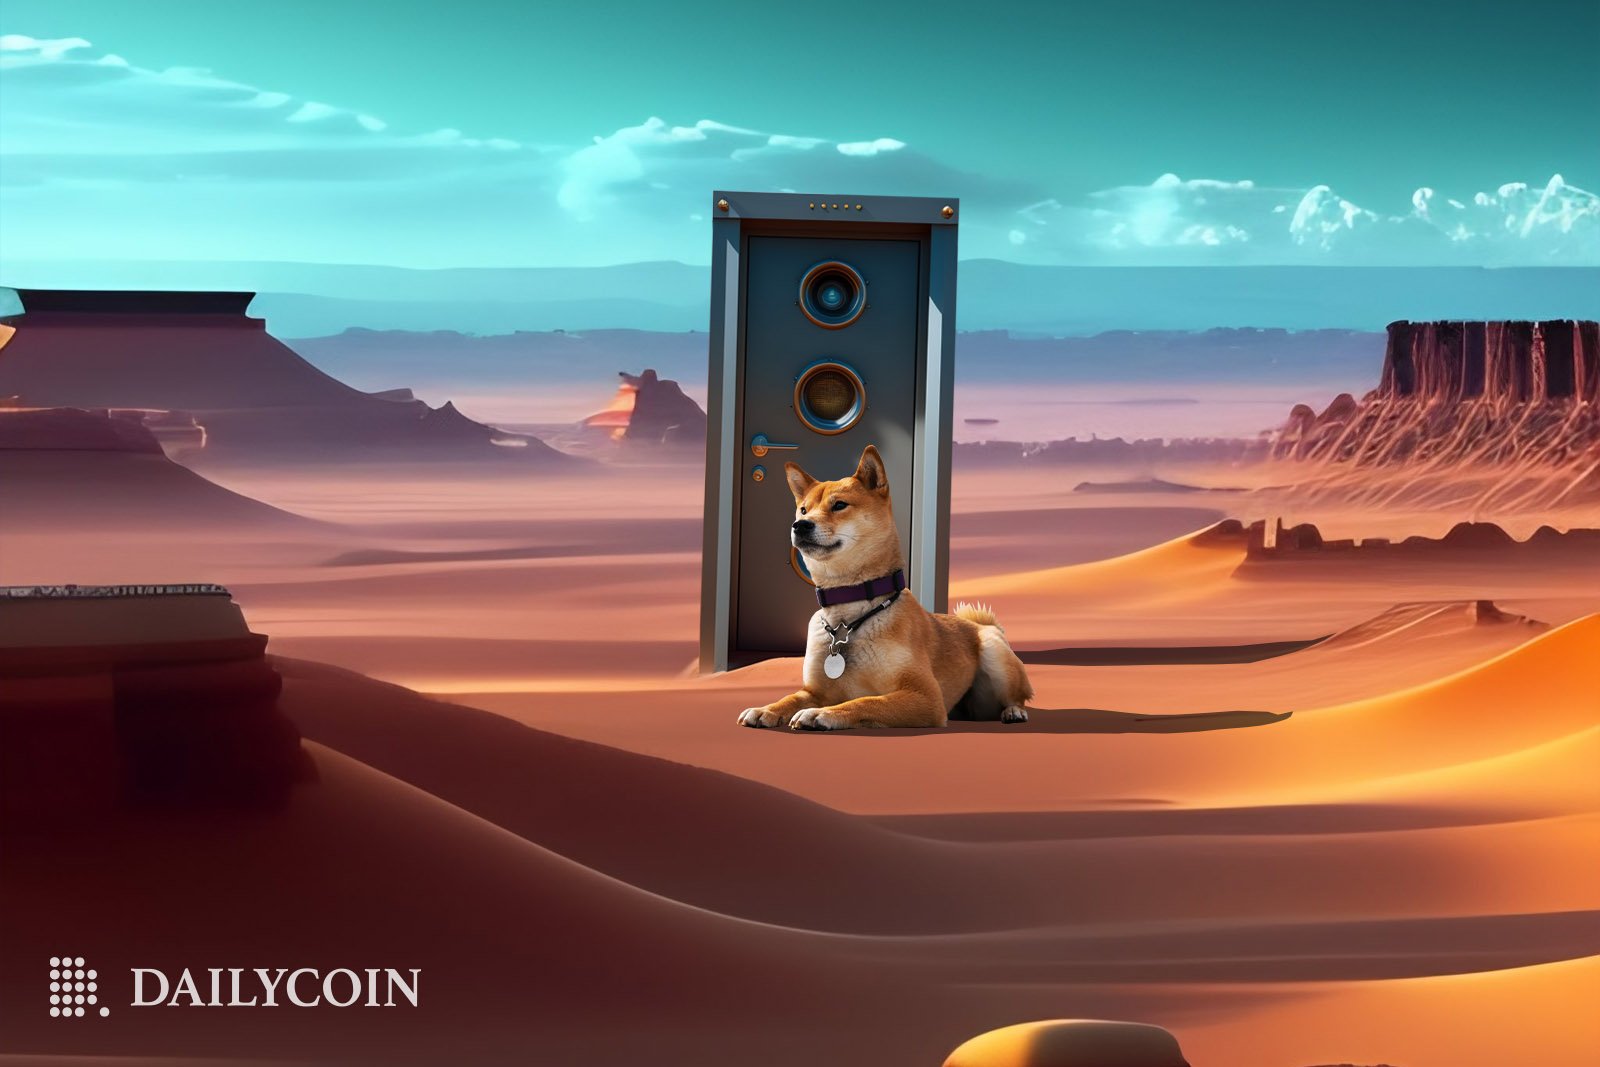 A proud Shiba Inu guard dog sitting in the desert in front of a door into the SHIB Metaverse.